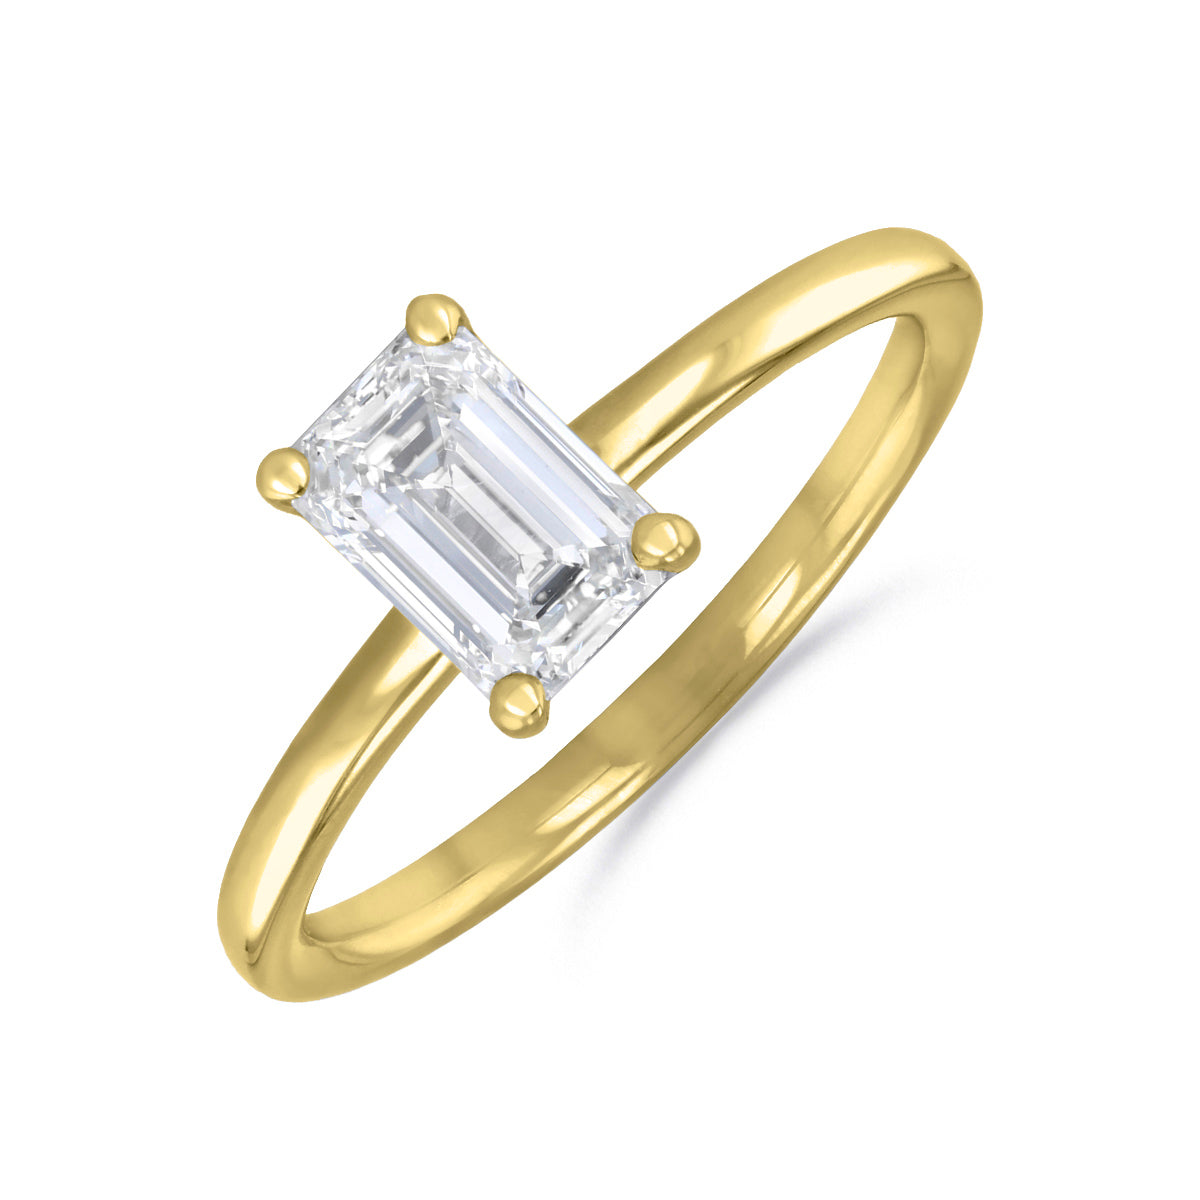 1-50ct-sofia-emerald-cut-solitaire-diamond-engagement-ring-18ct-yellow-gold